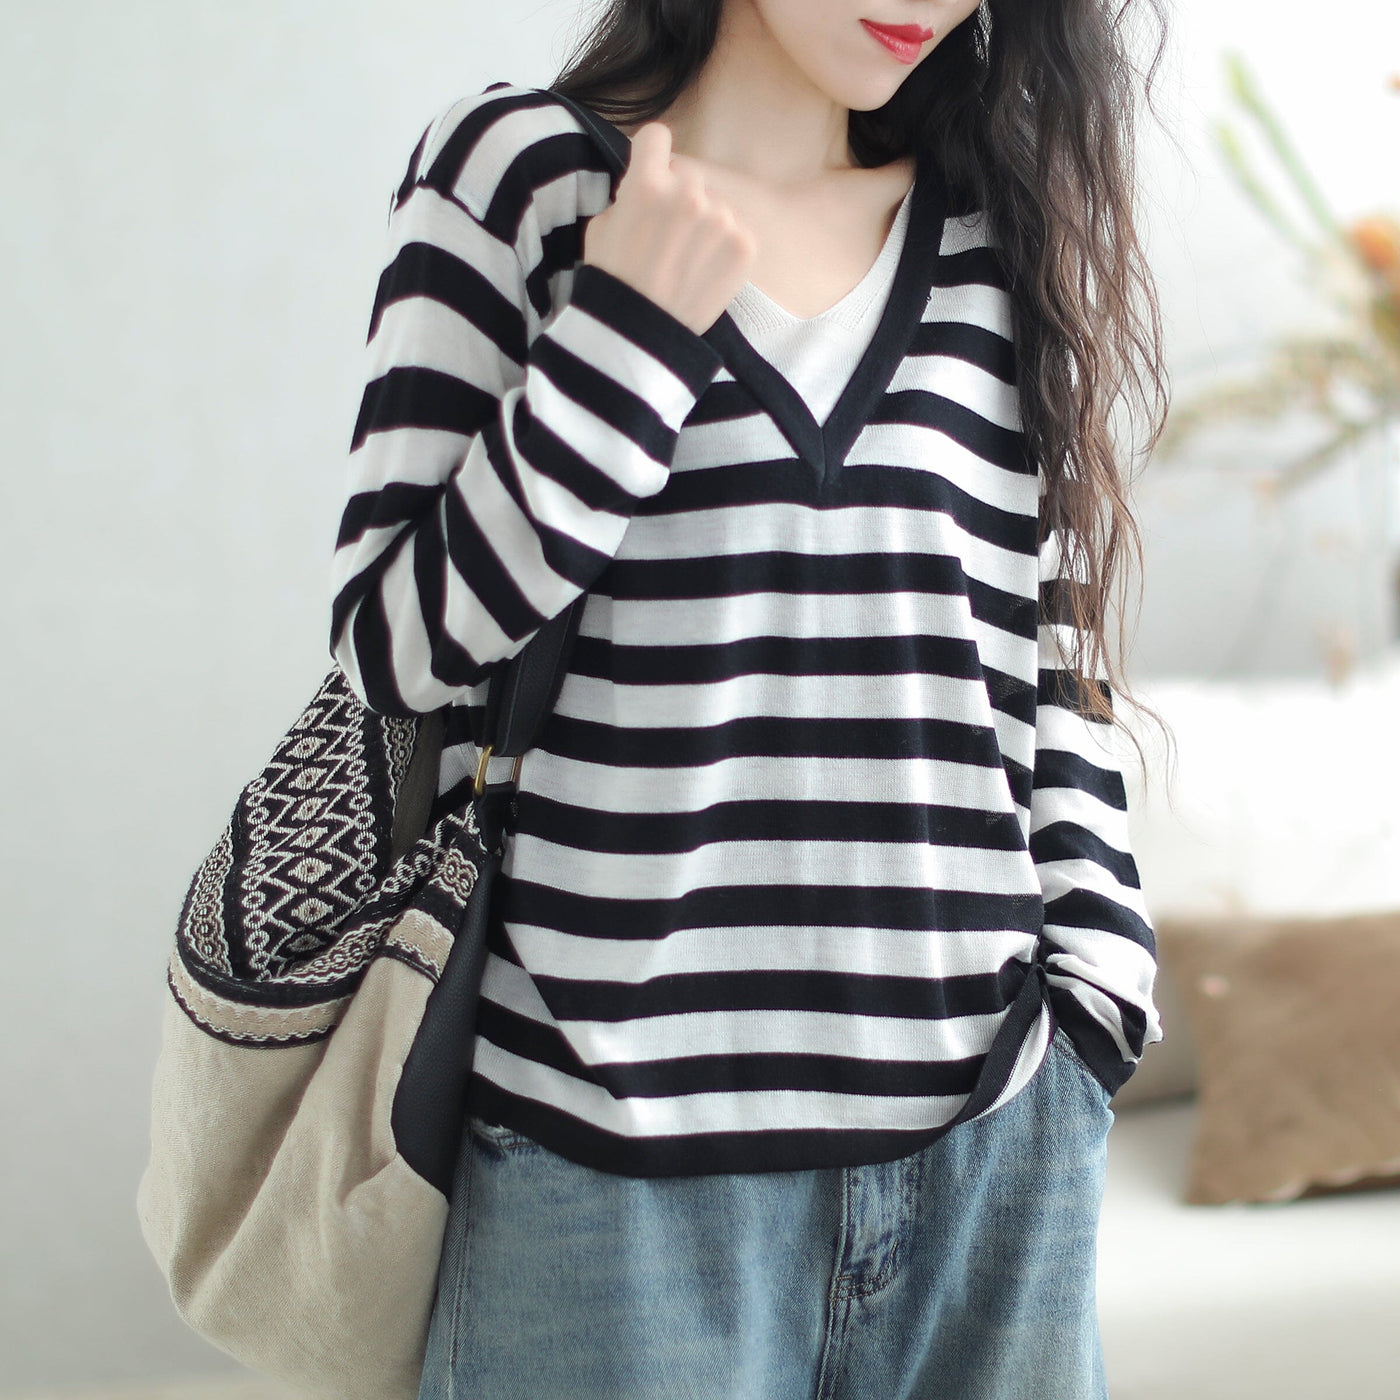 Women Loose Casual Fashion Stripe Knitted Top